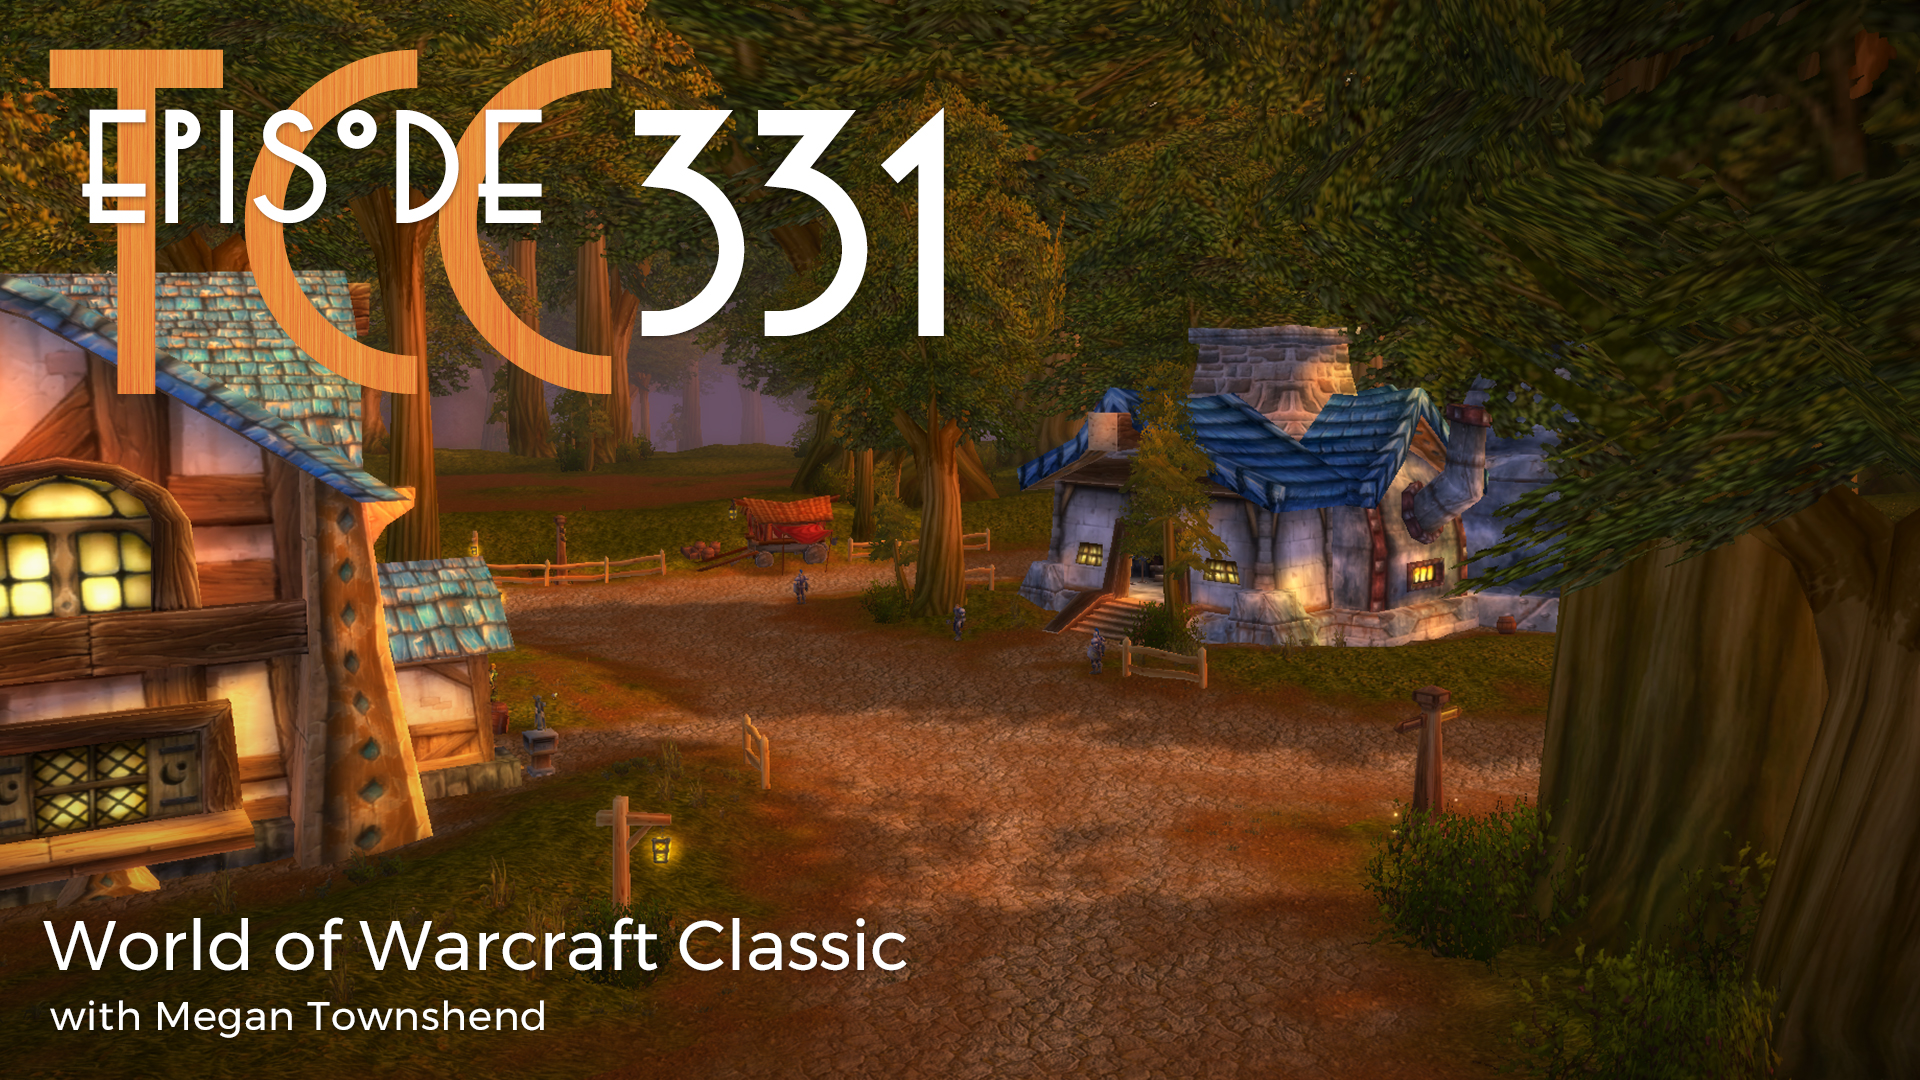 The Citadel Cafe 331: World of Warcraft Classic